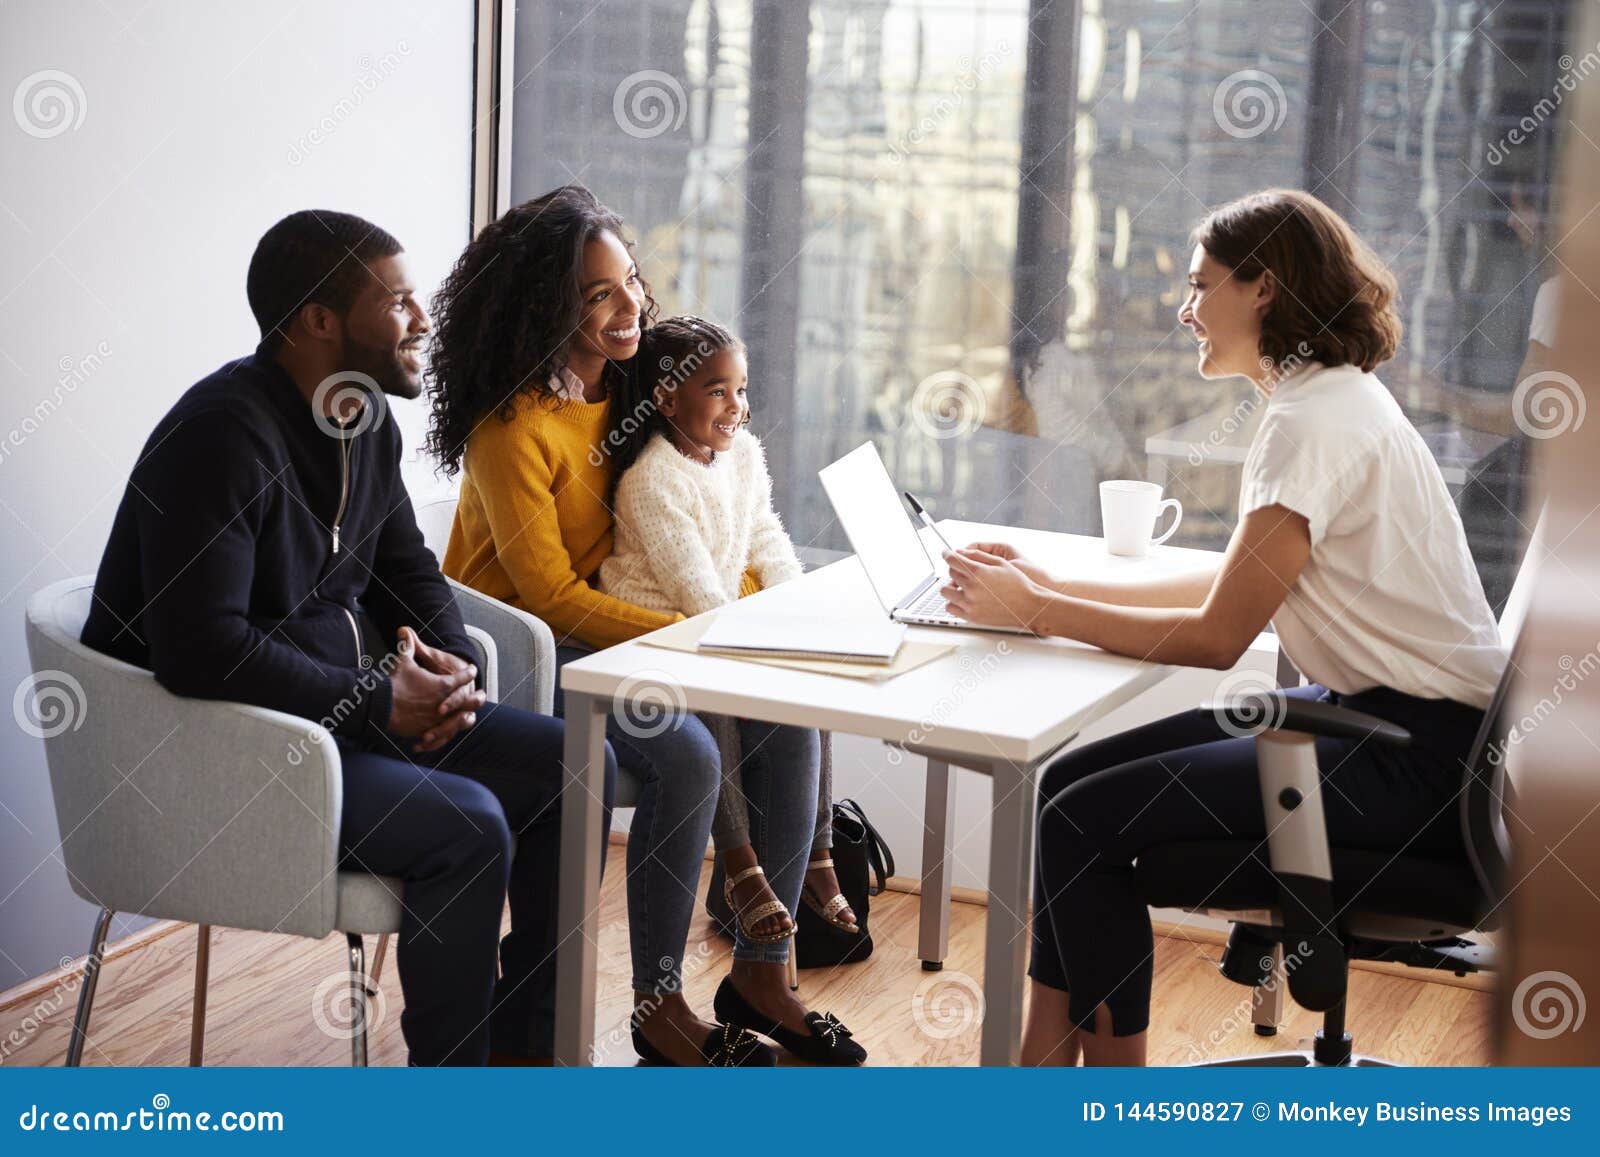 family having consultation with female pediatrician in hospital office